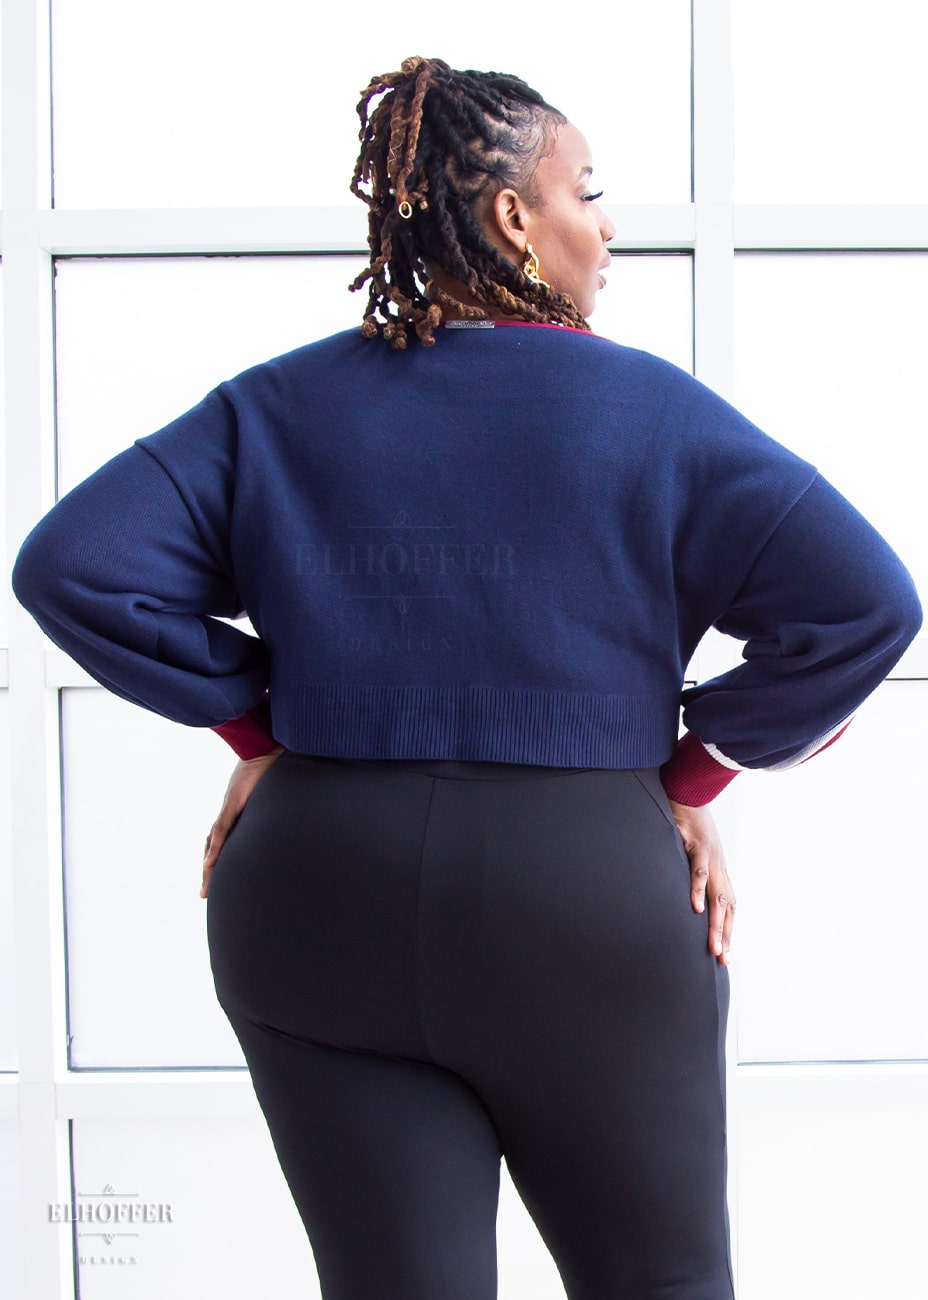 Myjah is modeling the Production 3XL/4XL. She has a 48” Bust, 43.5” Waist, 60” Hips, and is 6’1”.